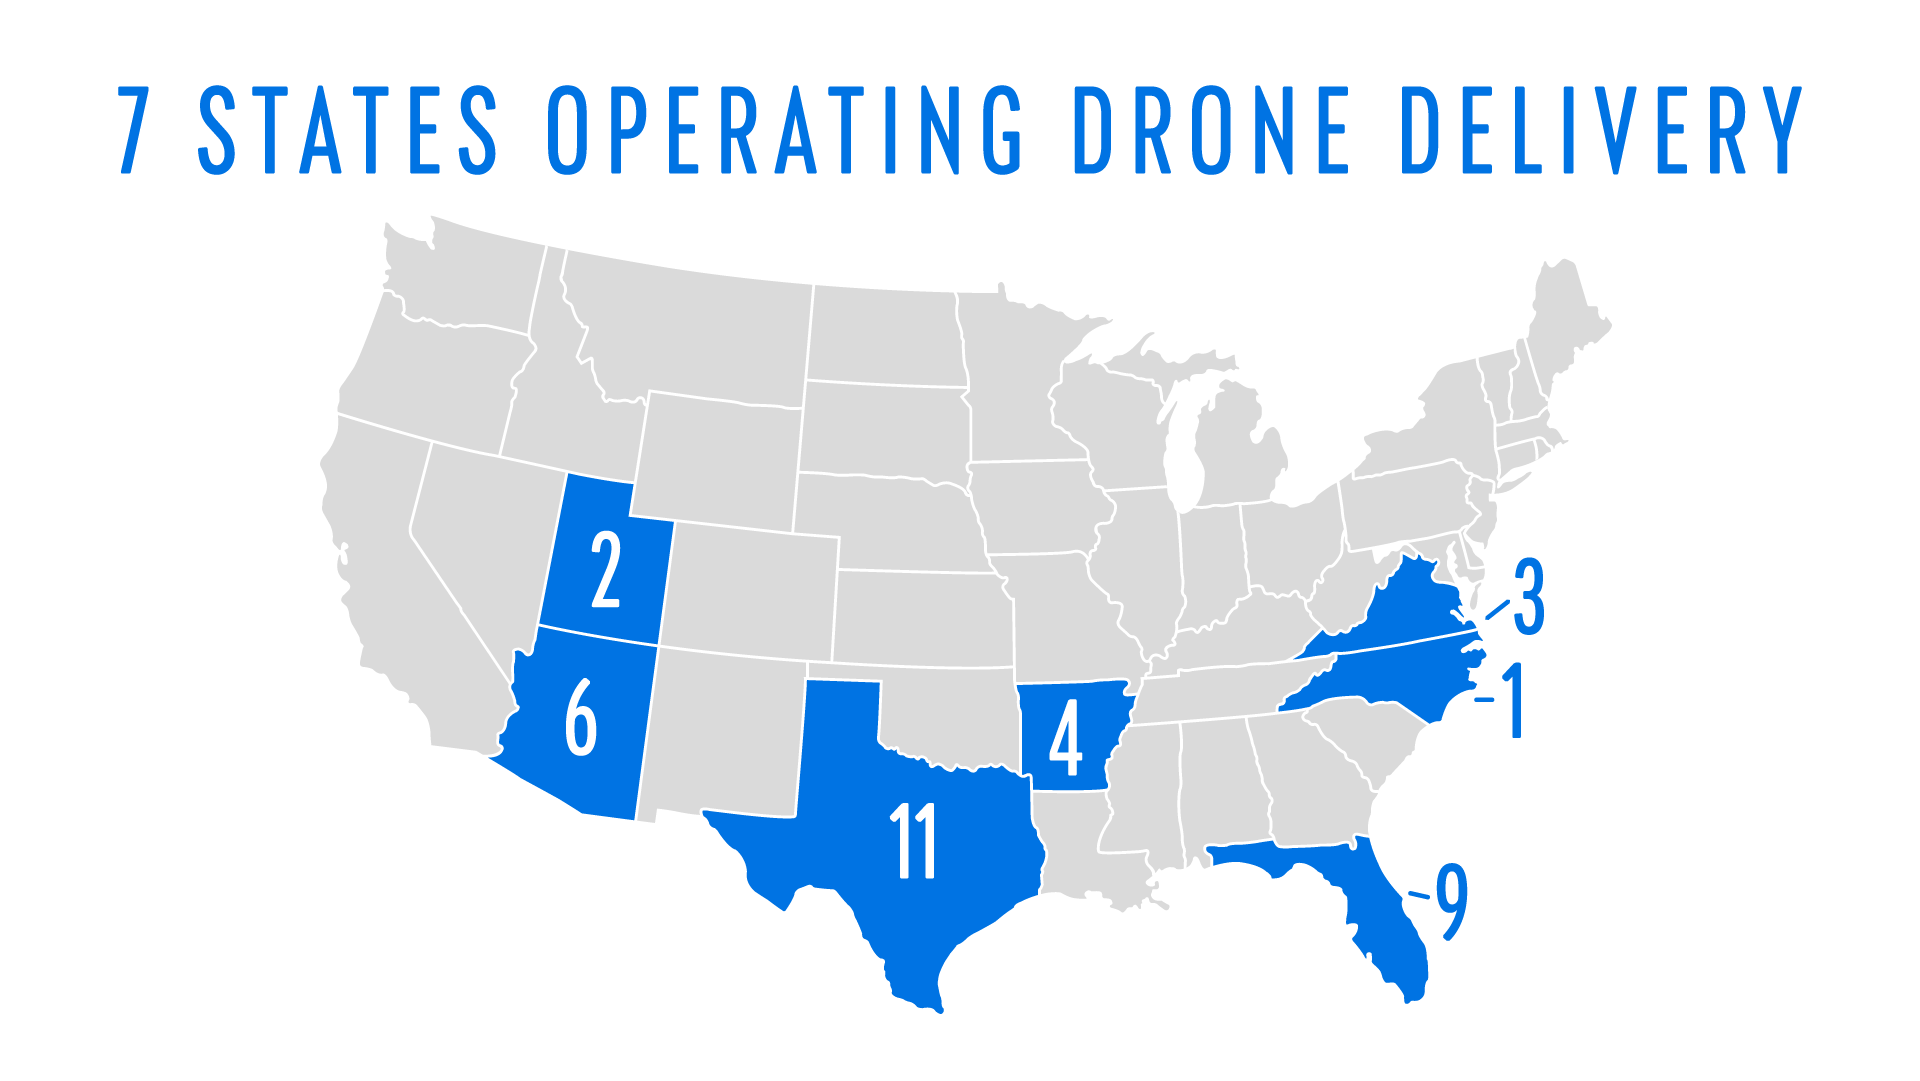 7 States Operating Drone Delivery. Map of United States showing number of drone hubs within each state. Seven states colored in include the following: Arizona – 6, Utah – 2, Texas – 11, Arkansas – 4, Virginia – 3, North Carolina – 1, Florida – 9